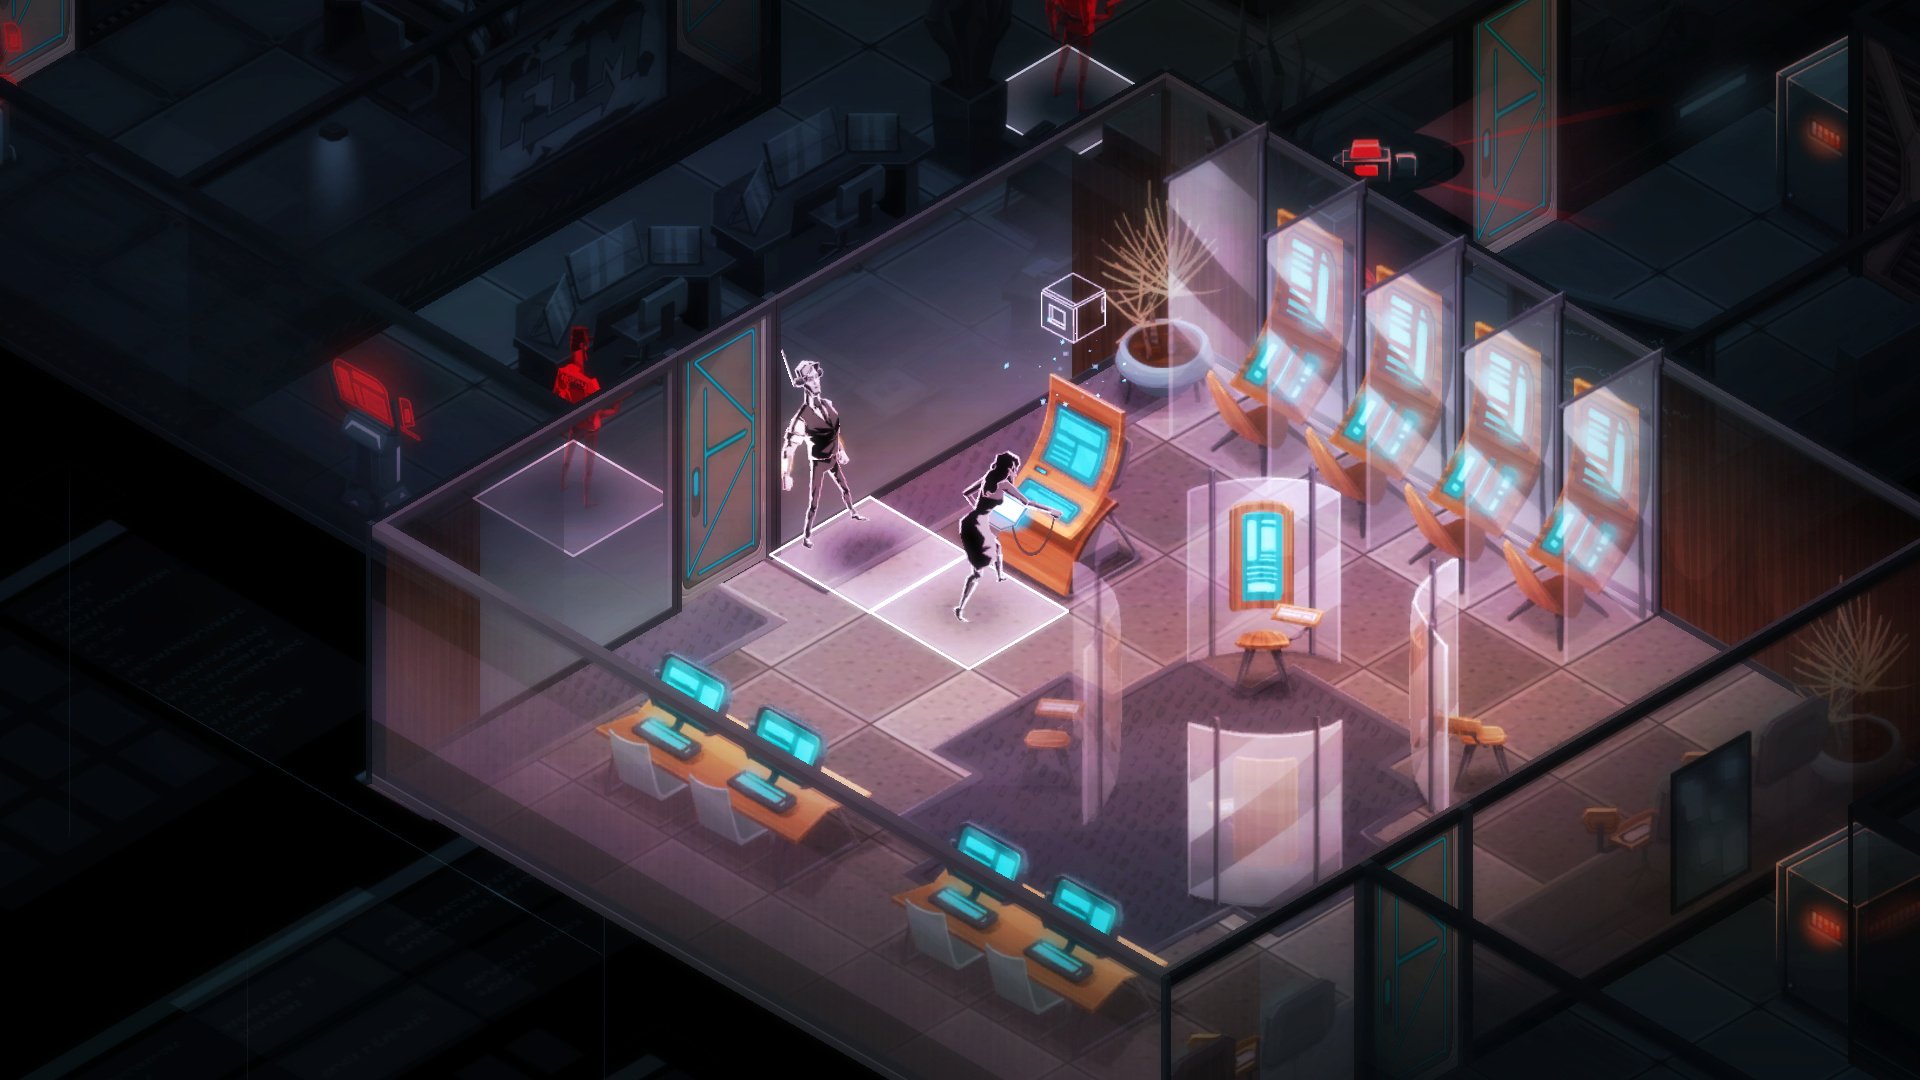 invisible inc klei download